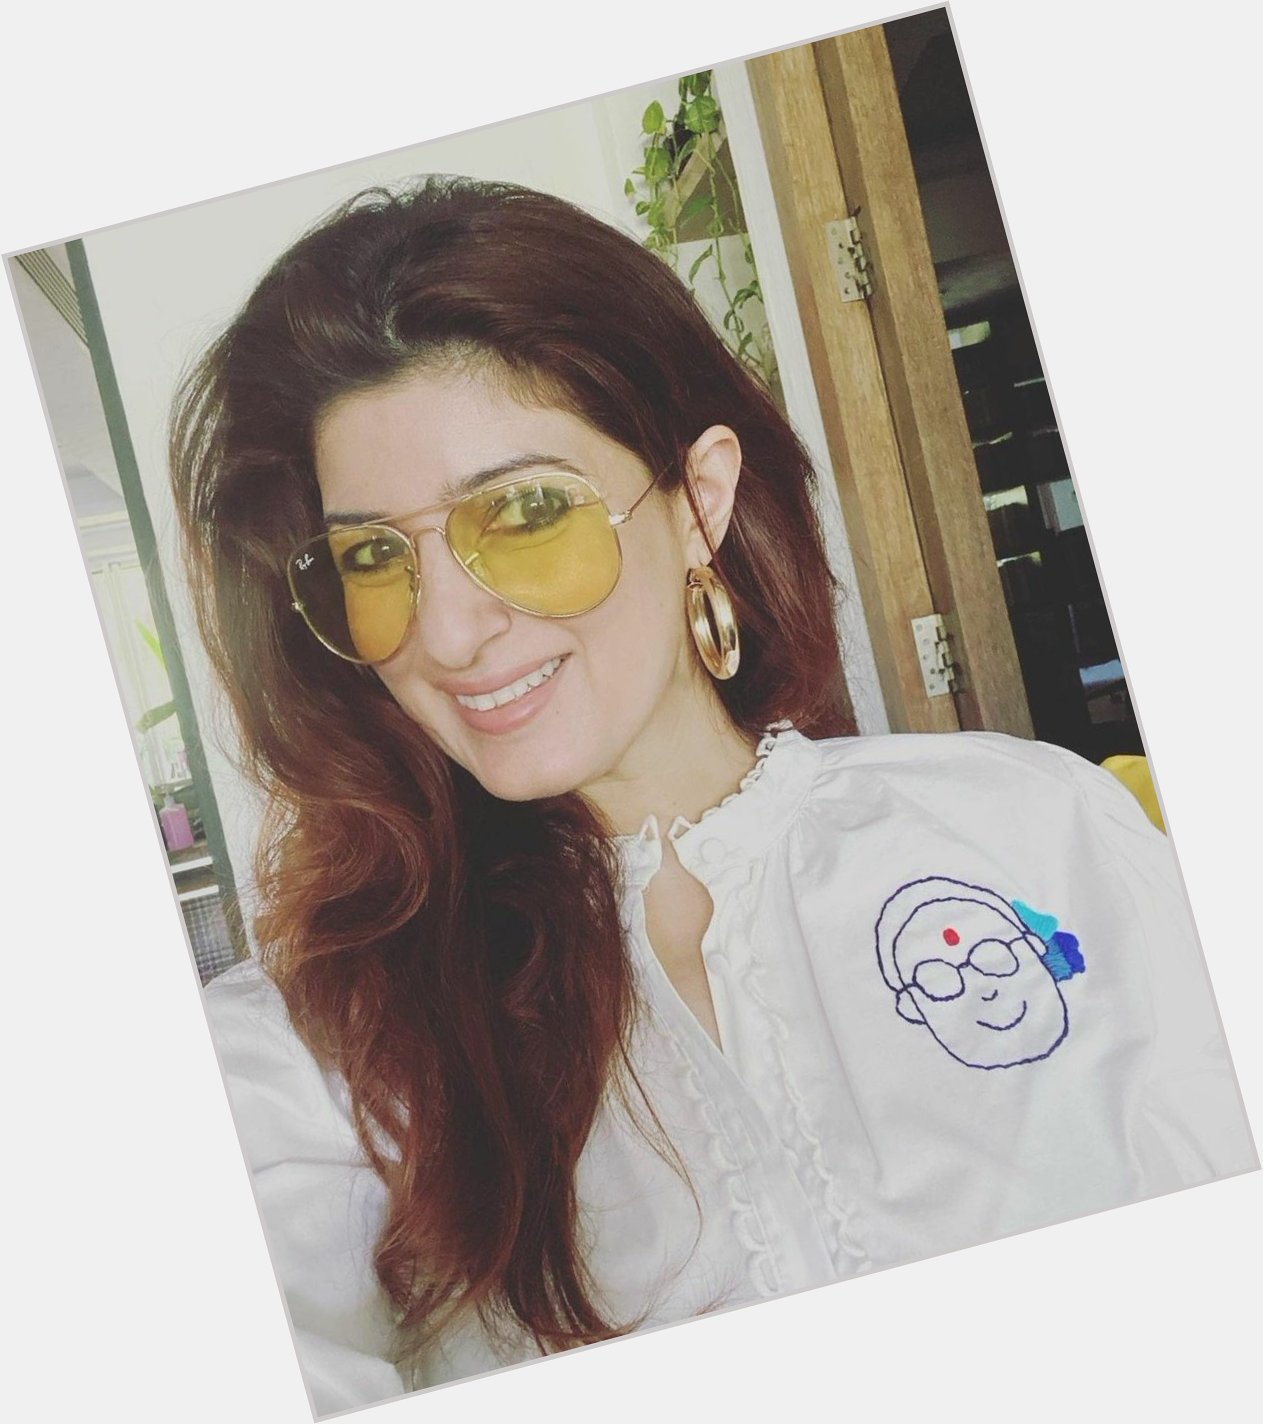 Wishing the gorgeous Twinkle Khanna a very Happy Birthday!   